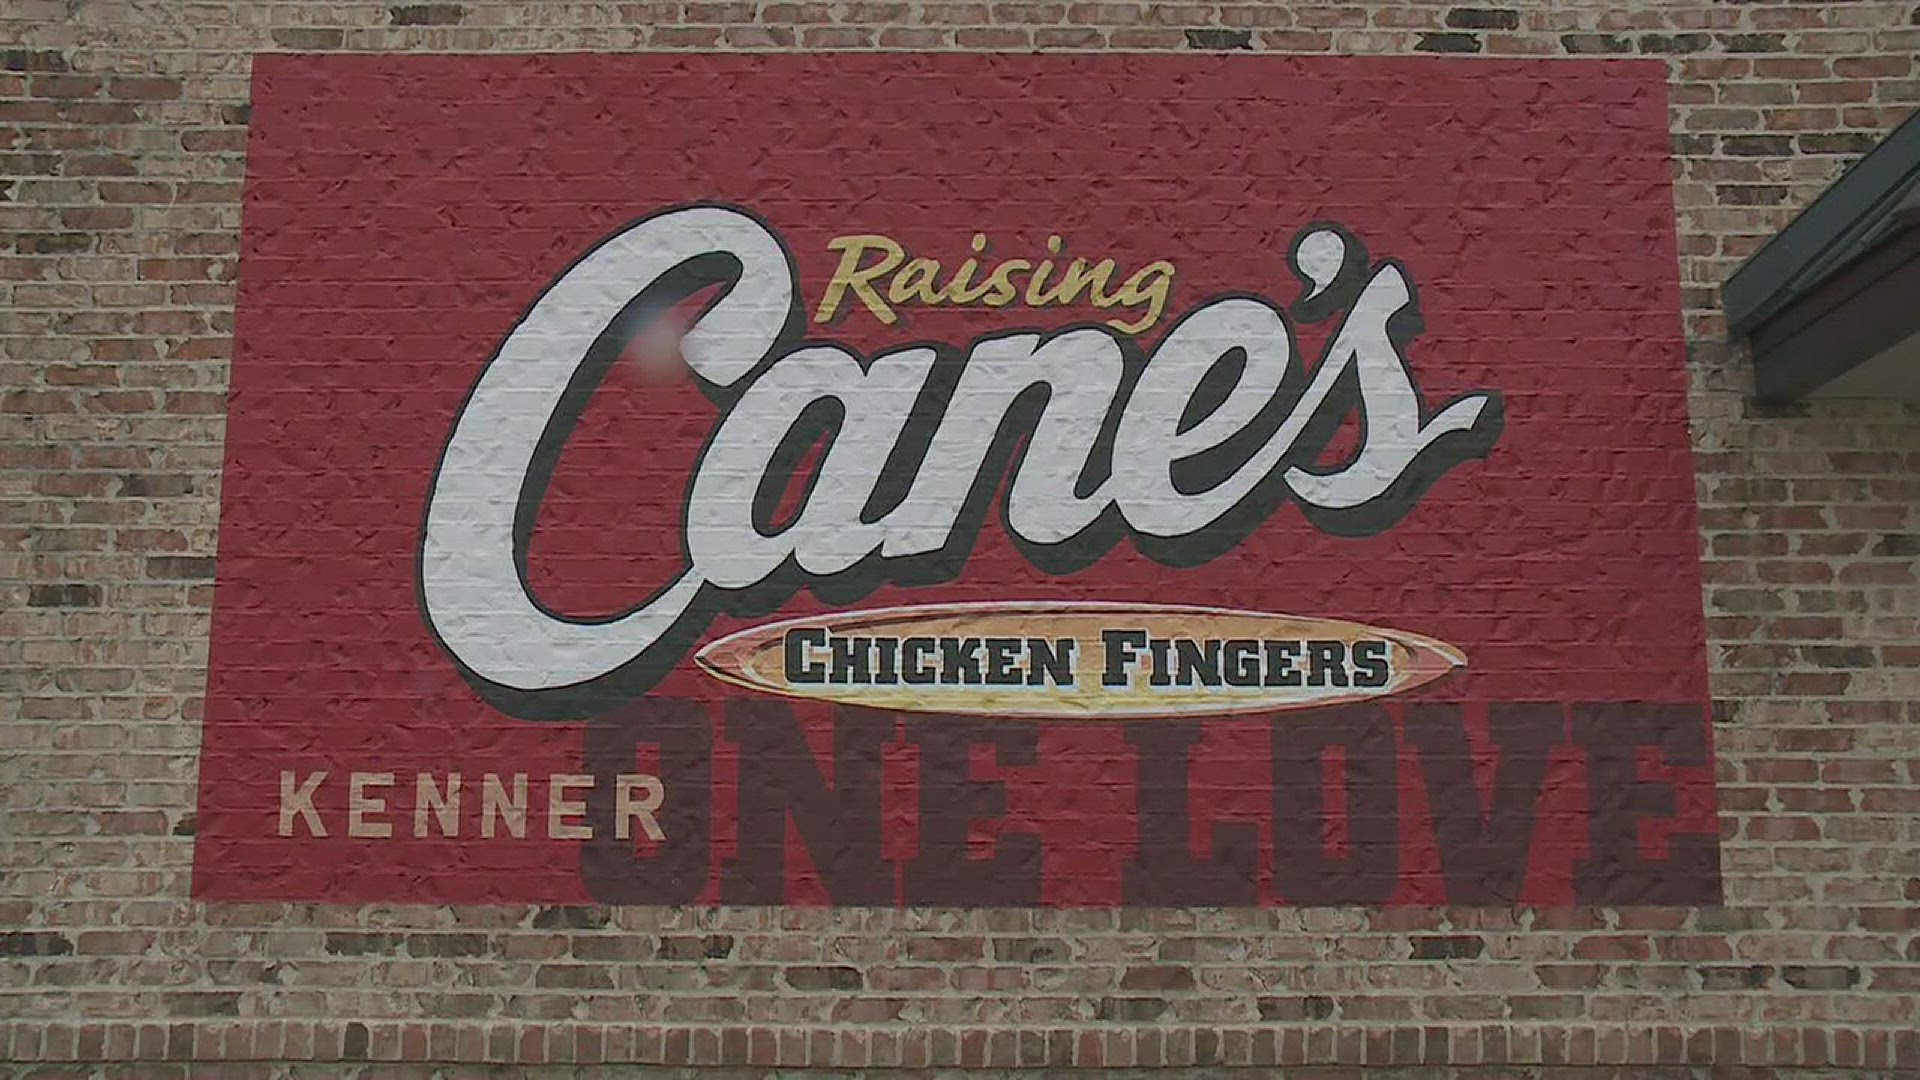 A detective gave the gruesome details about a robbery that turned deadly at a Kenner Raising Cane's.